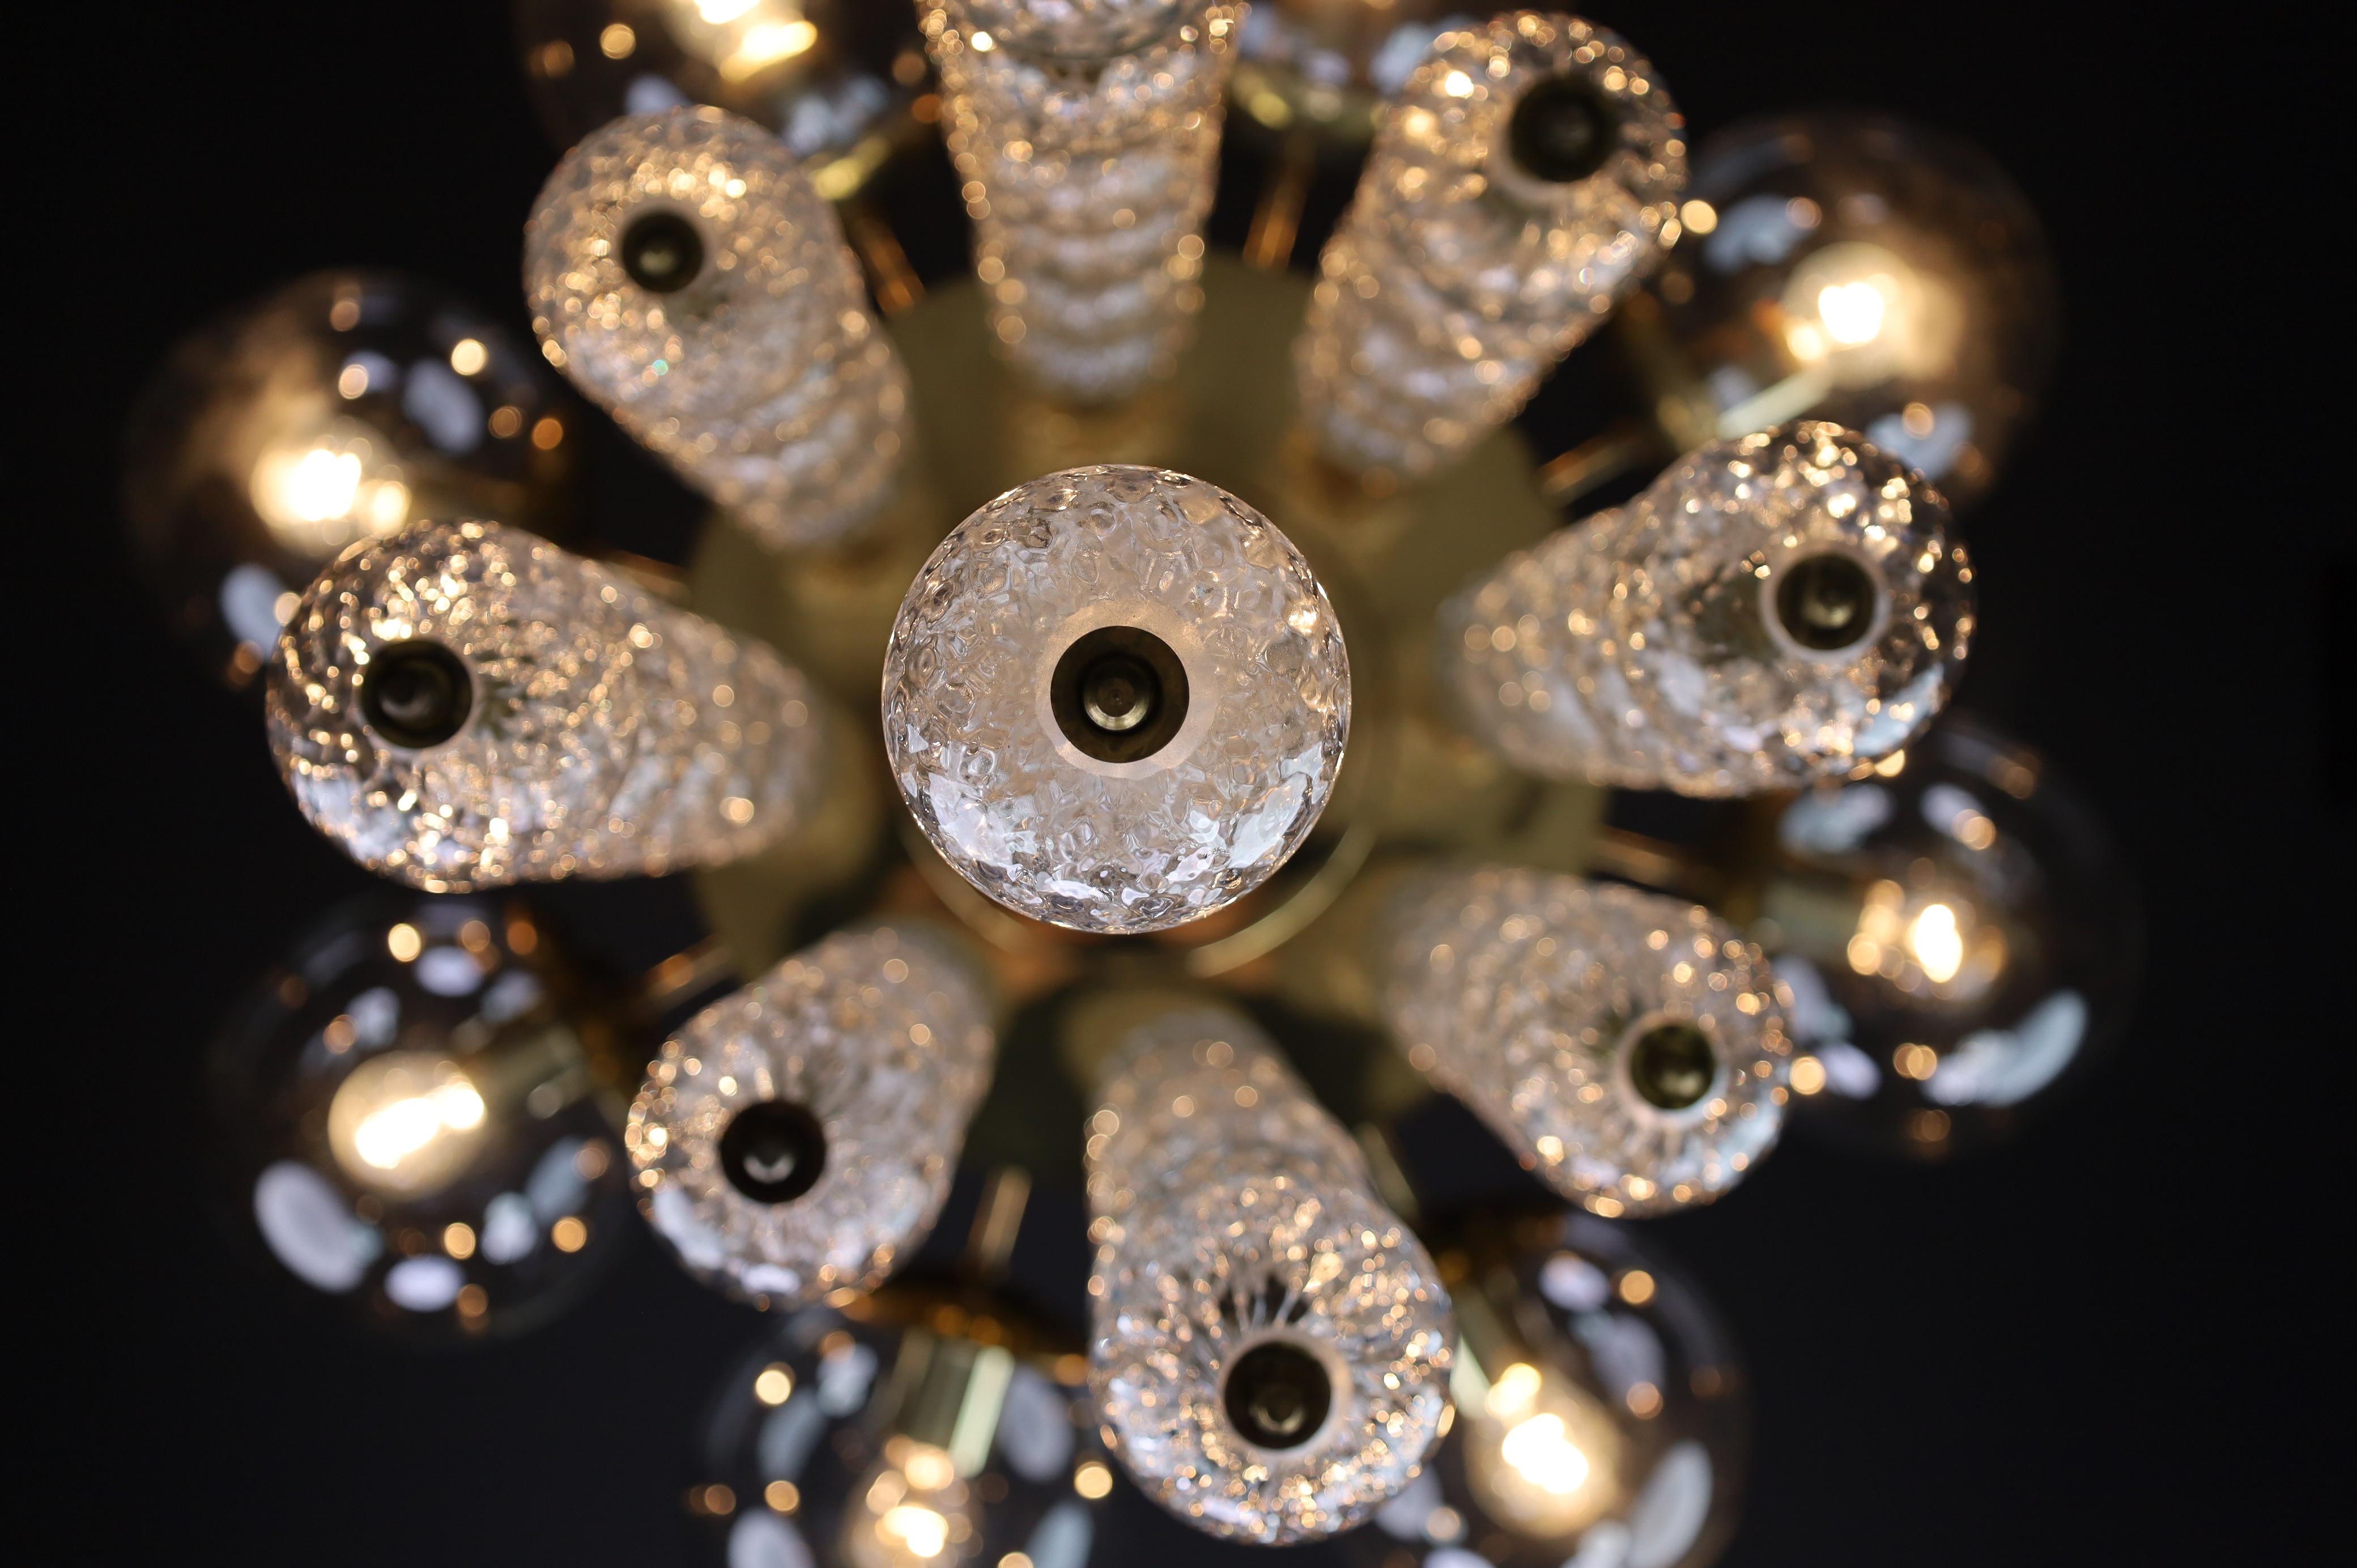 Grand Chandelier with Brass Fixture and Hand-blowed Glass Globes, 1960s For Sale 7